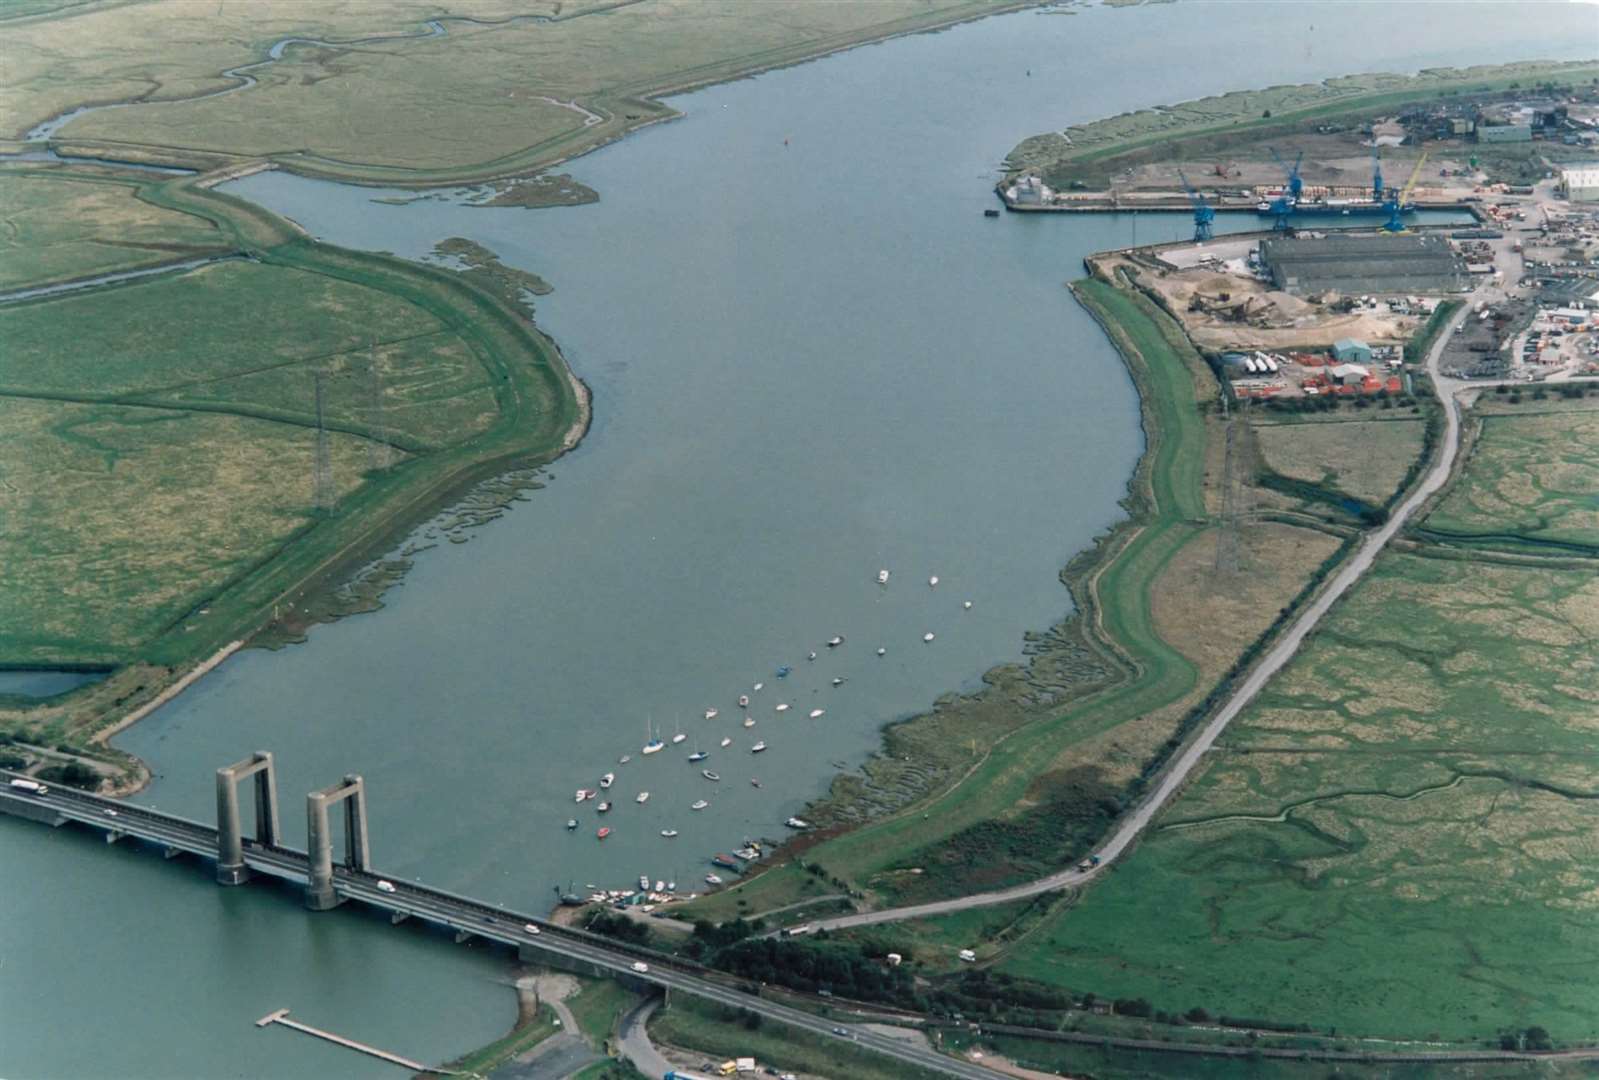 Kingsferry Bridge and Ridham Docks photographed in September 1995